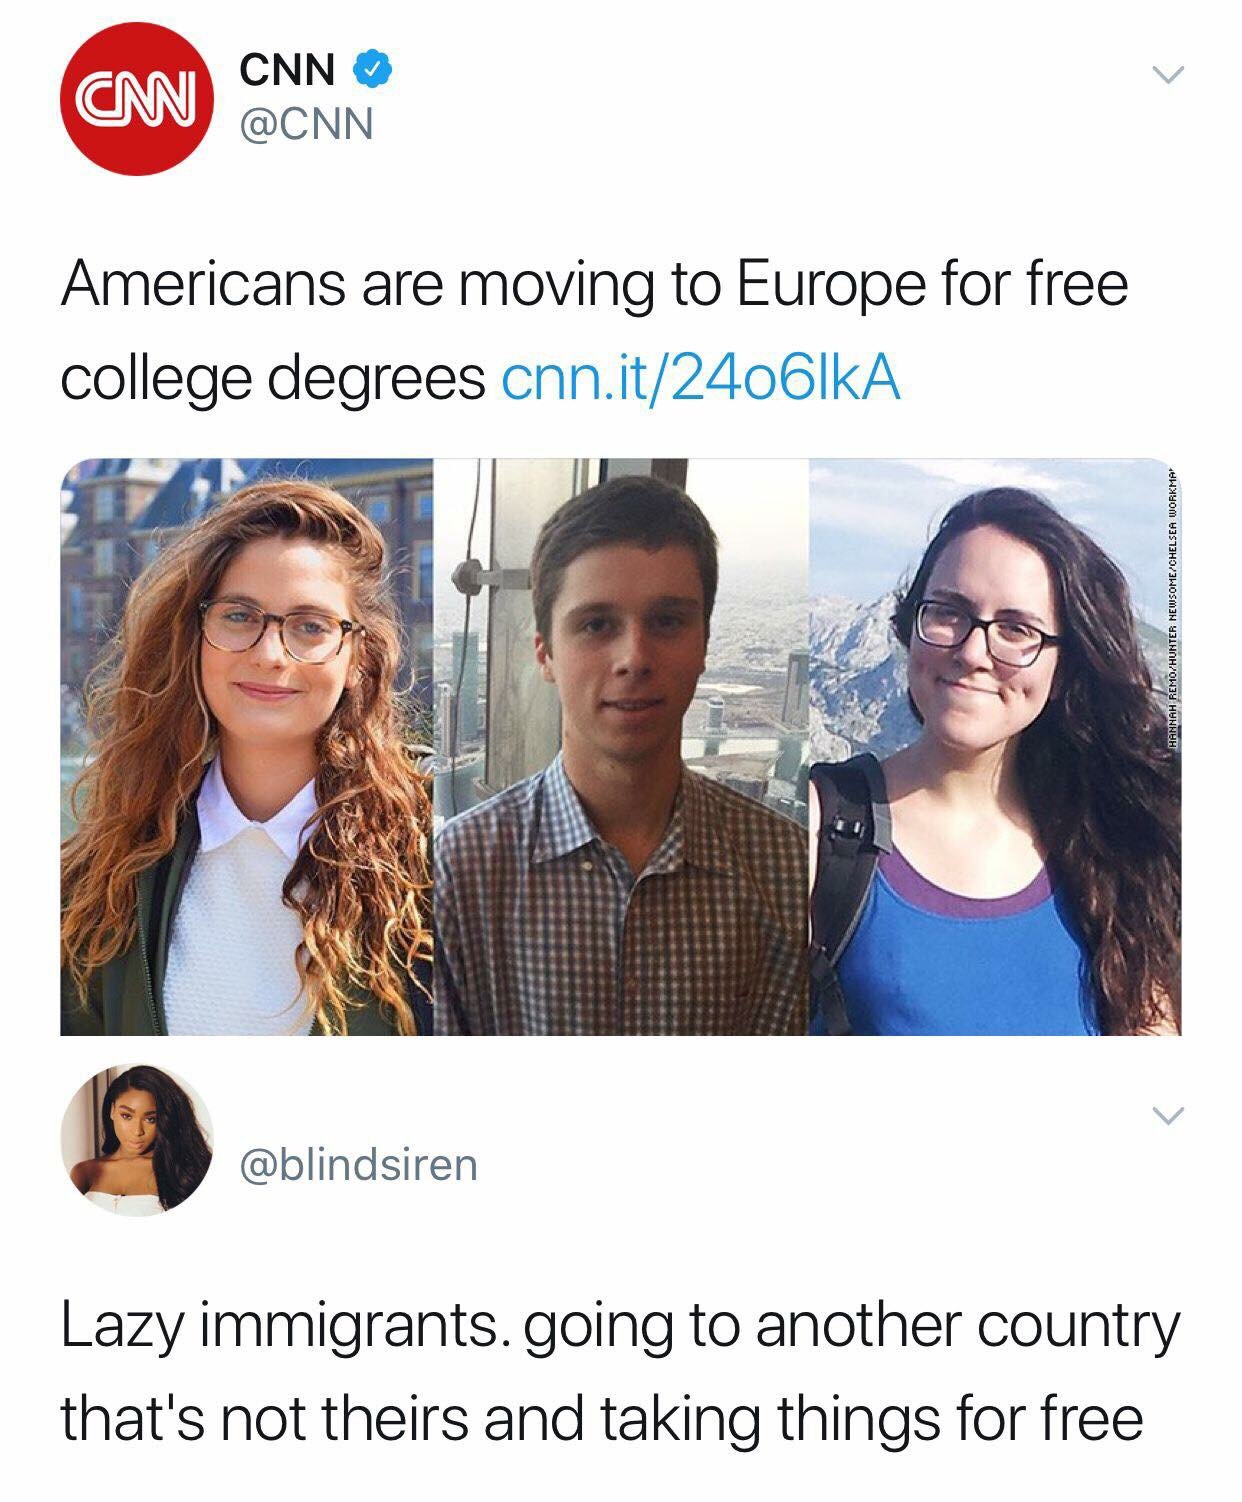 Fun fact about American's moving to Europe for free education and someone pointing out how they resemble immigrants